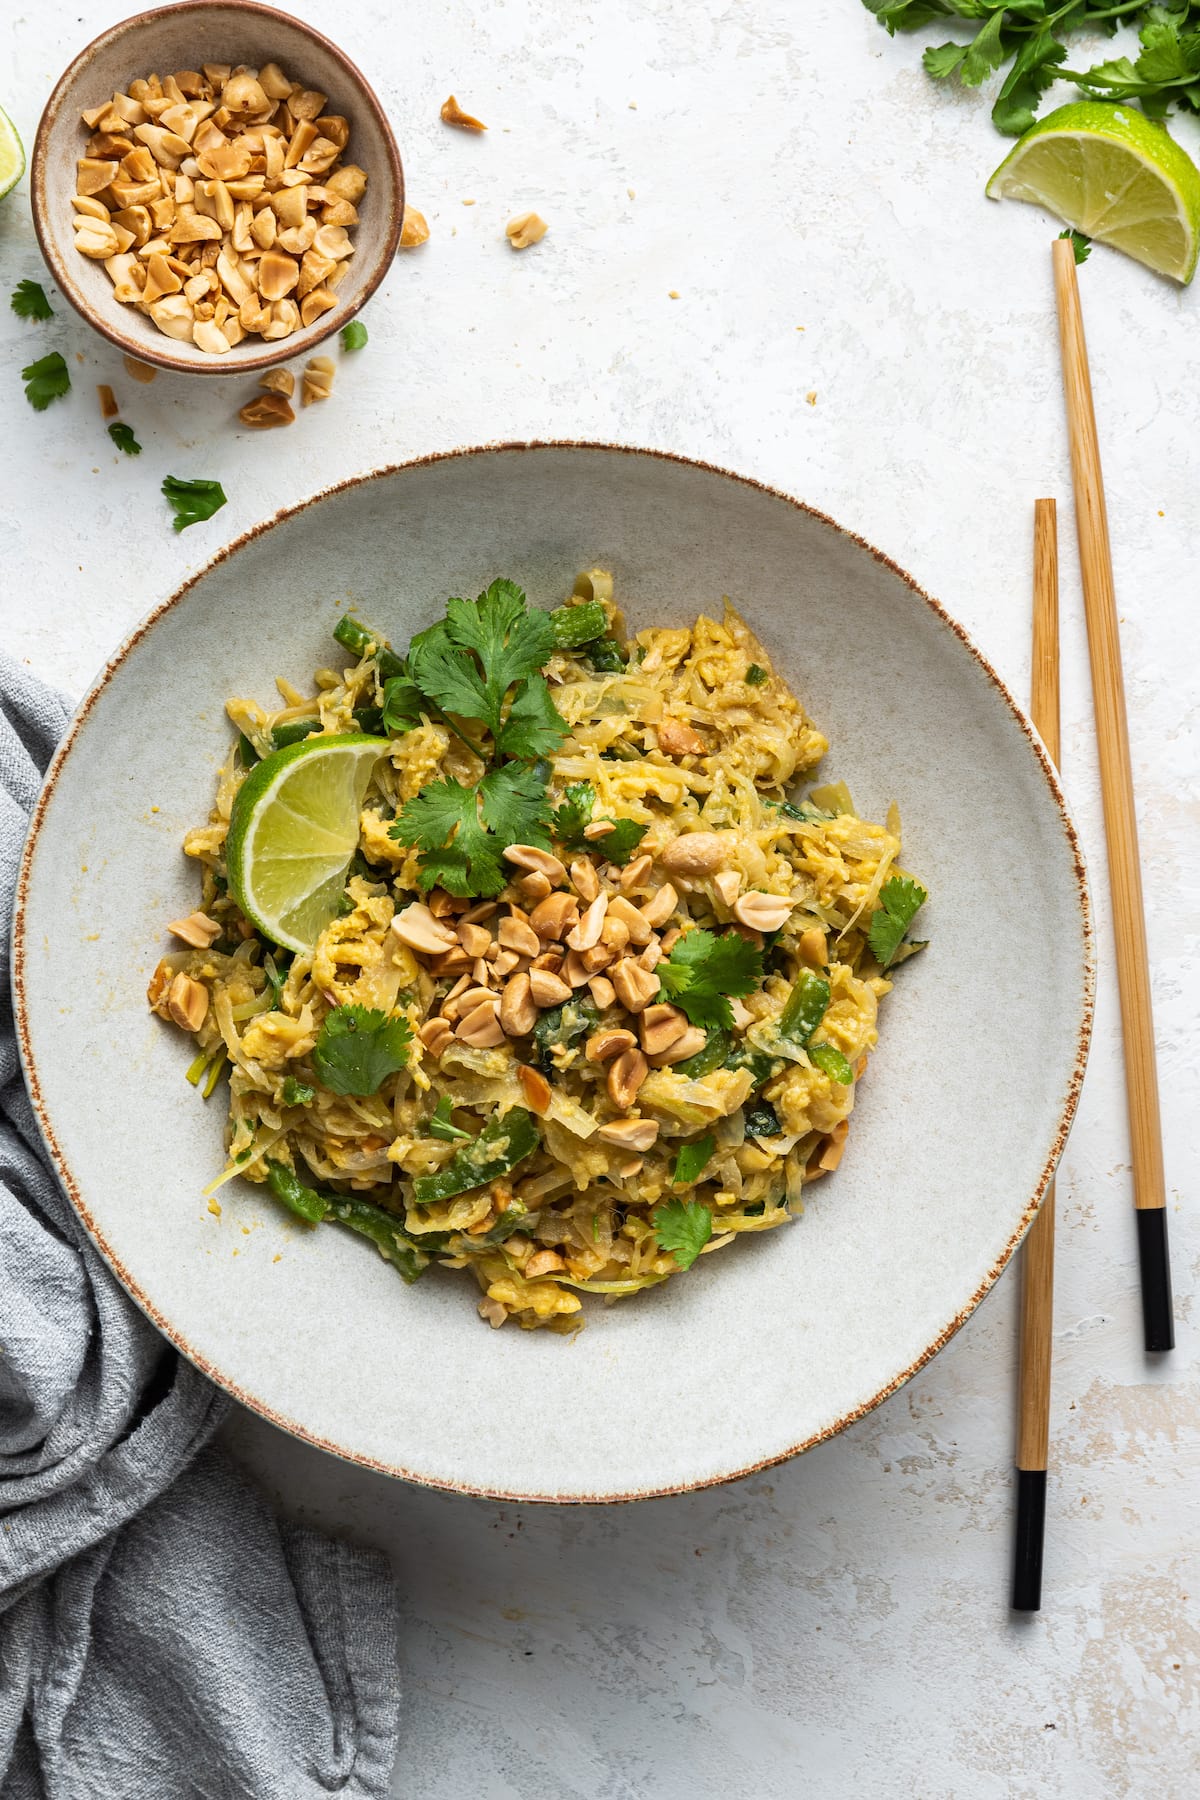 Healthy pad thai garnished with fresh cilantro and peanuts on a white plate with wooden chopsticks.